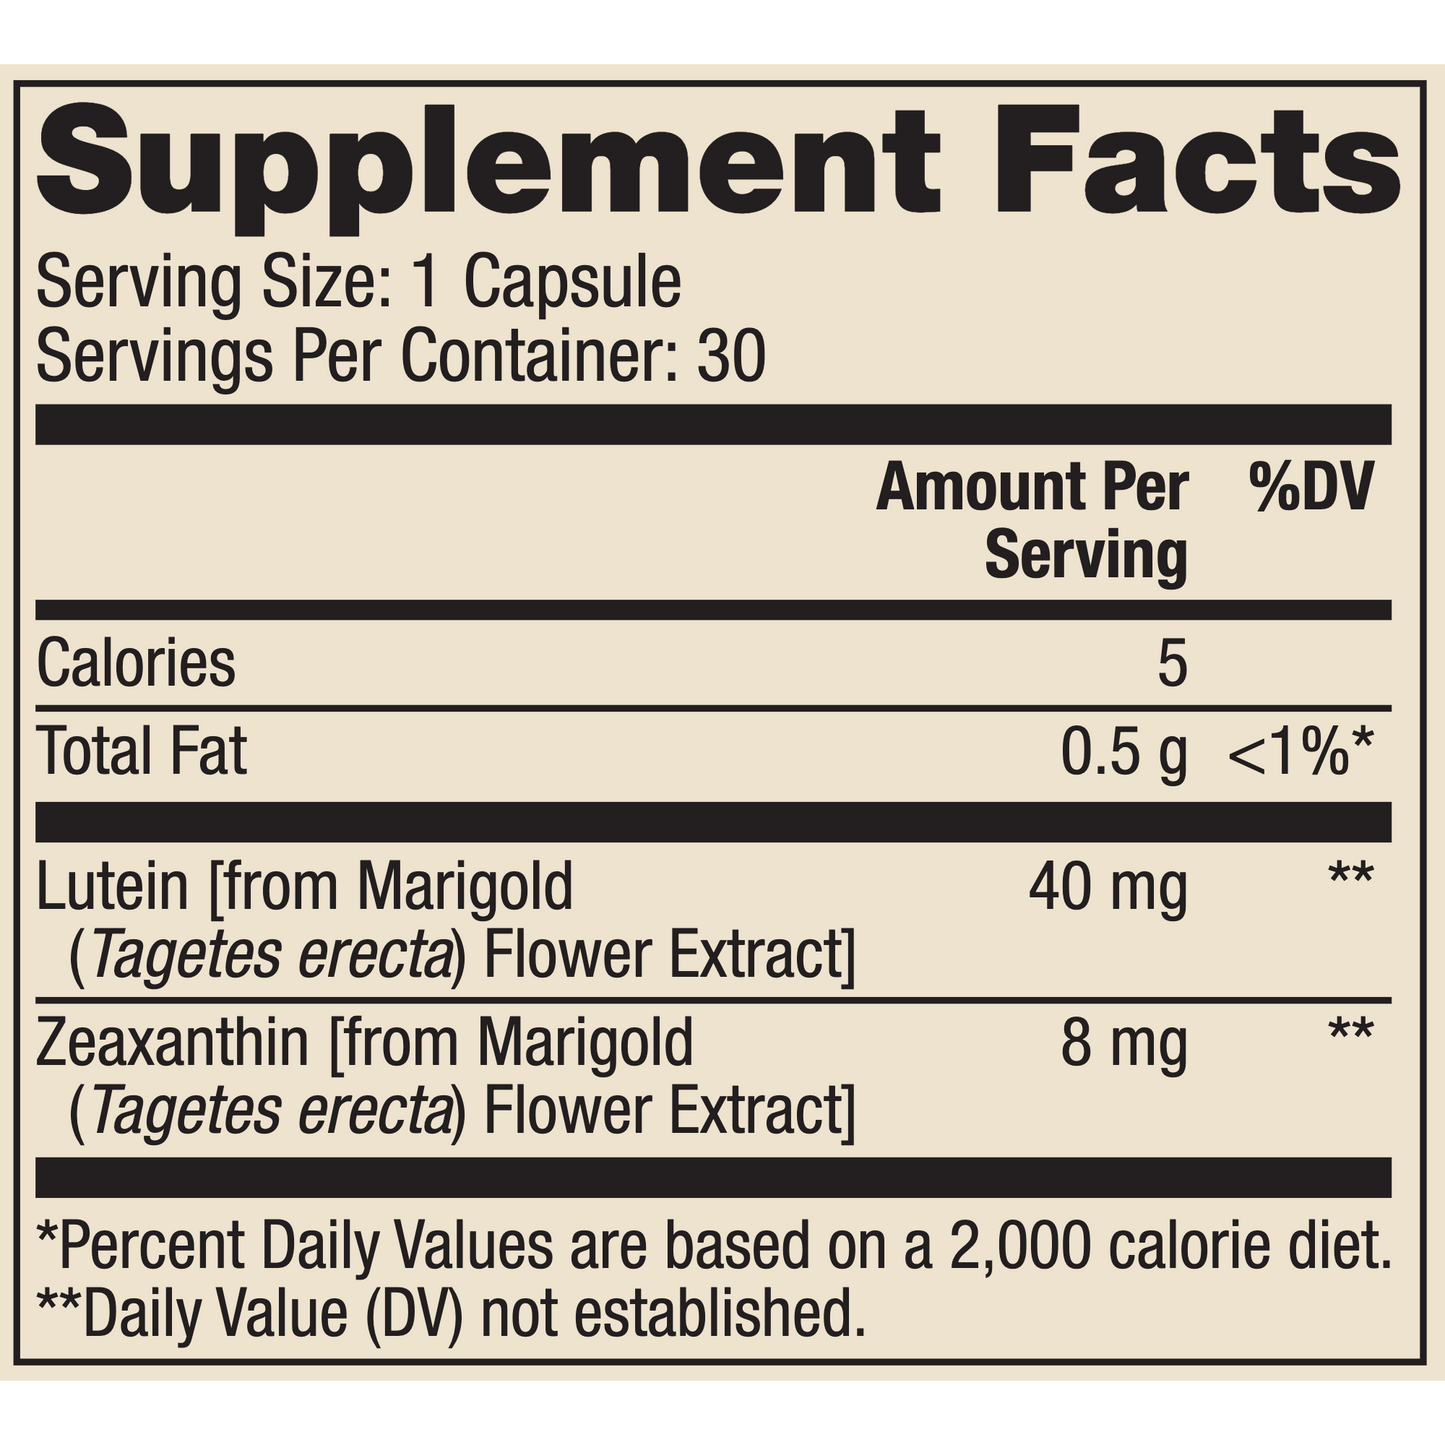 Dr. Mercola Lutein with Zeaxathin